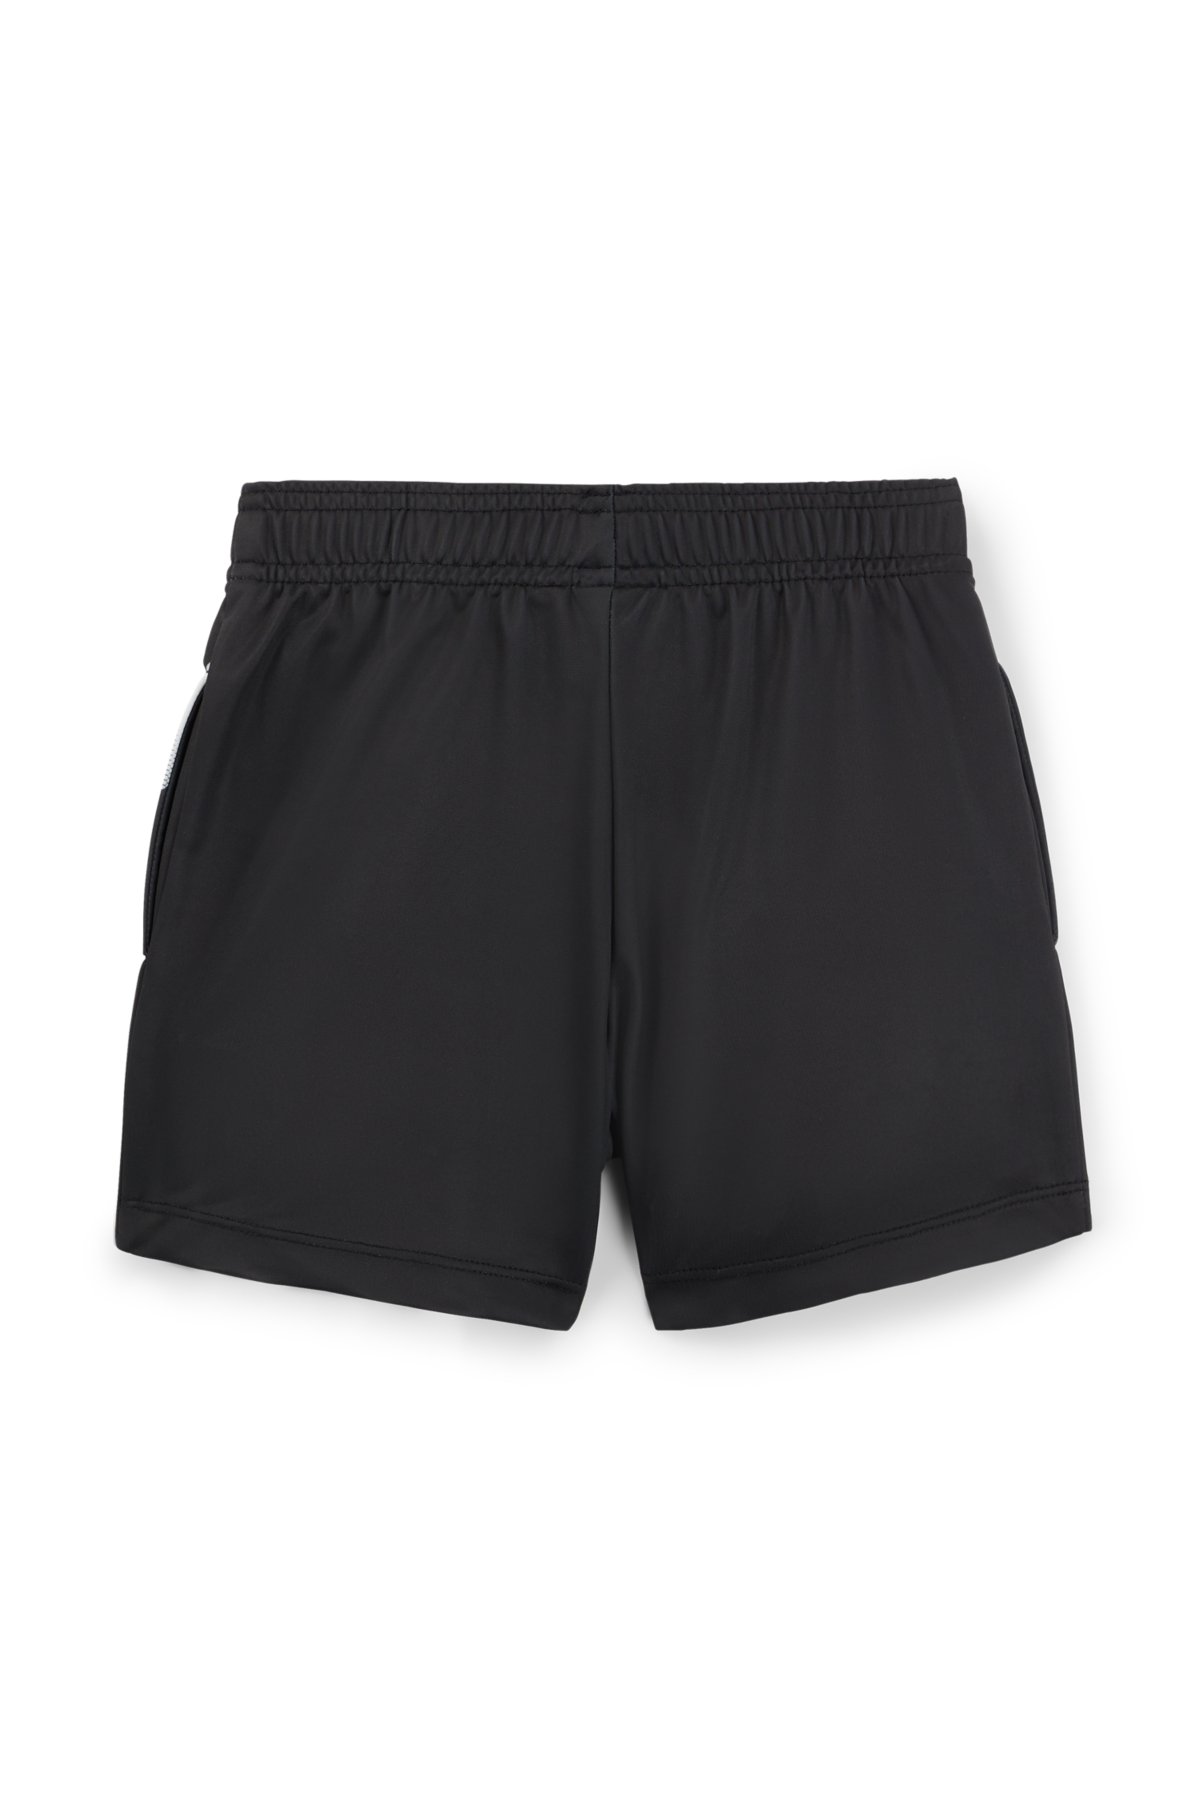 Kids' shorts in stretch fabric with degradé artwork, Black